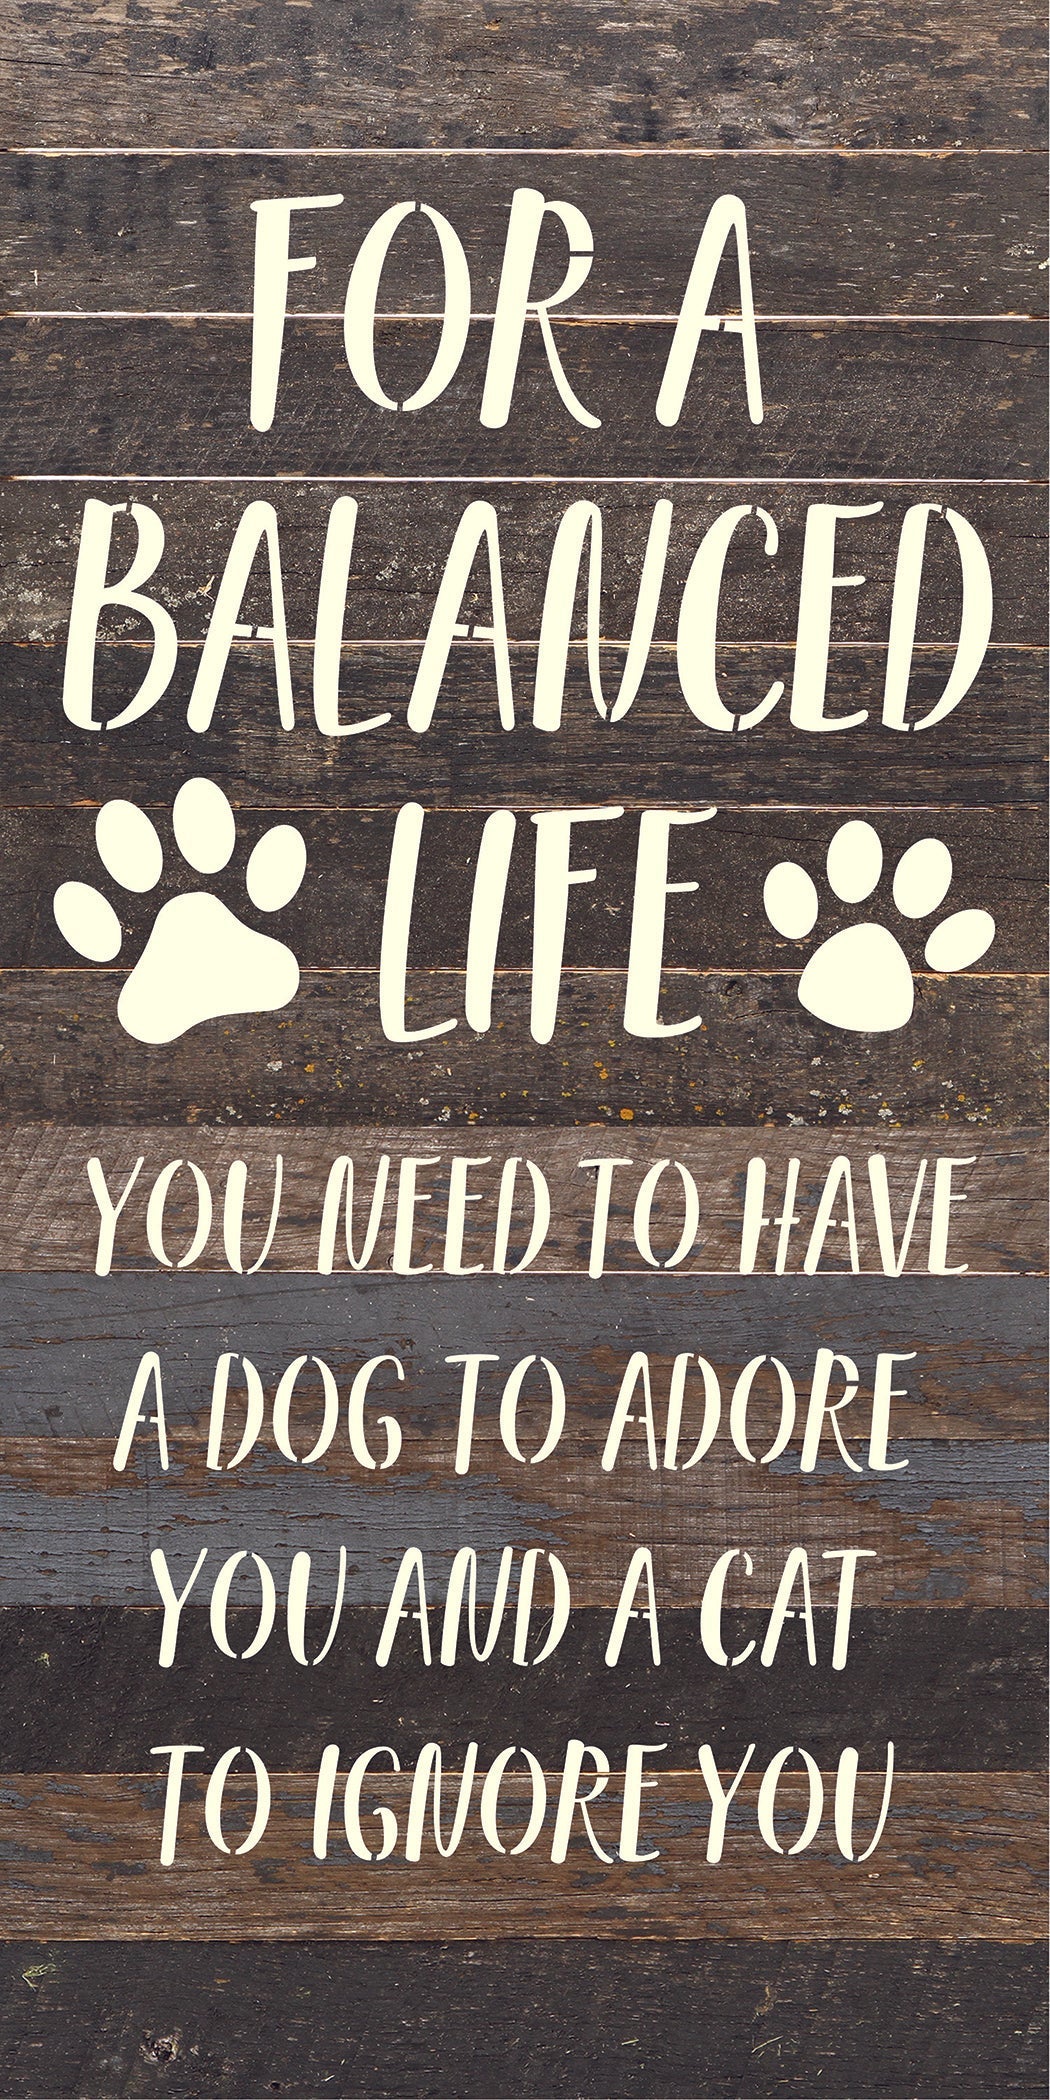 For a balanced life you need to have a dog to adore you and a cat to ignore you / 14x24 Reclaimed Wood Sign